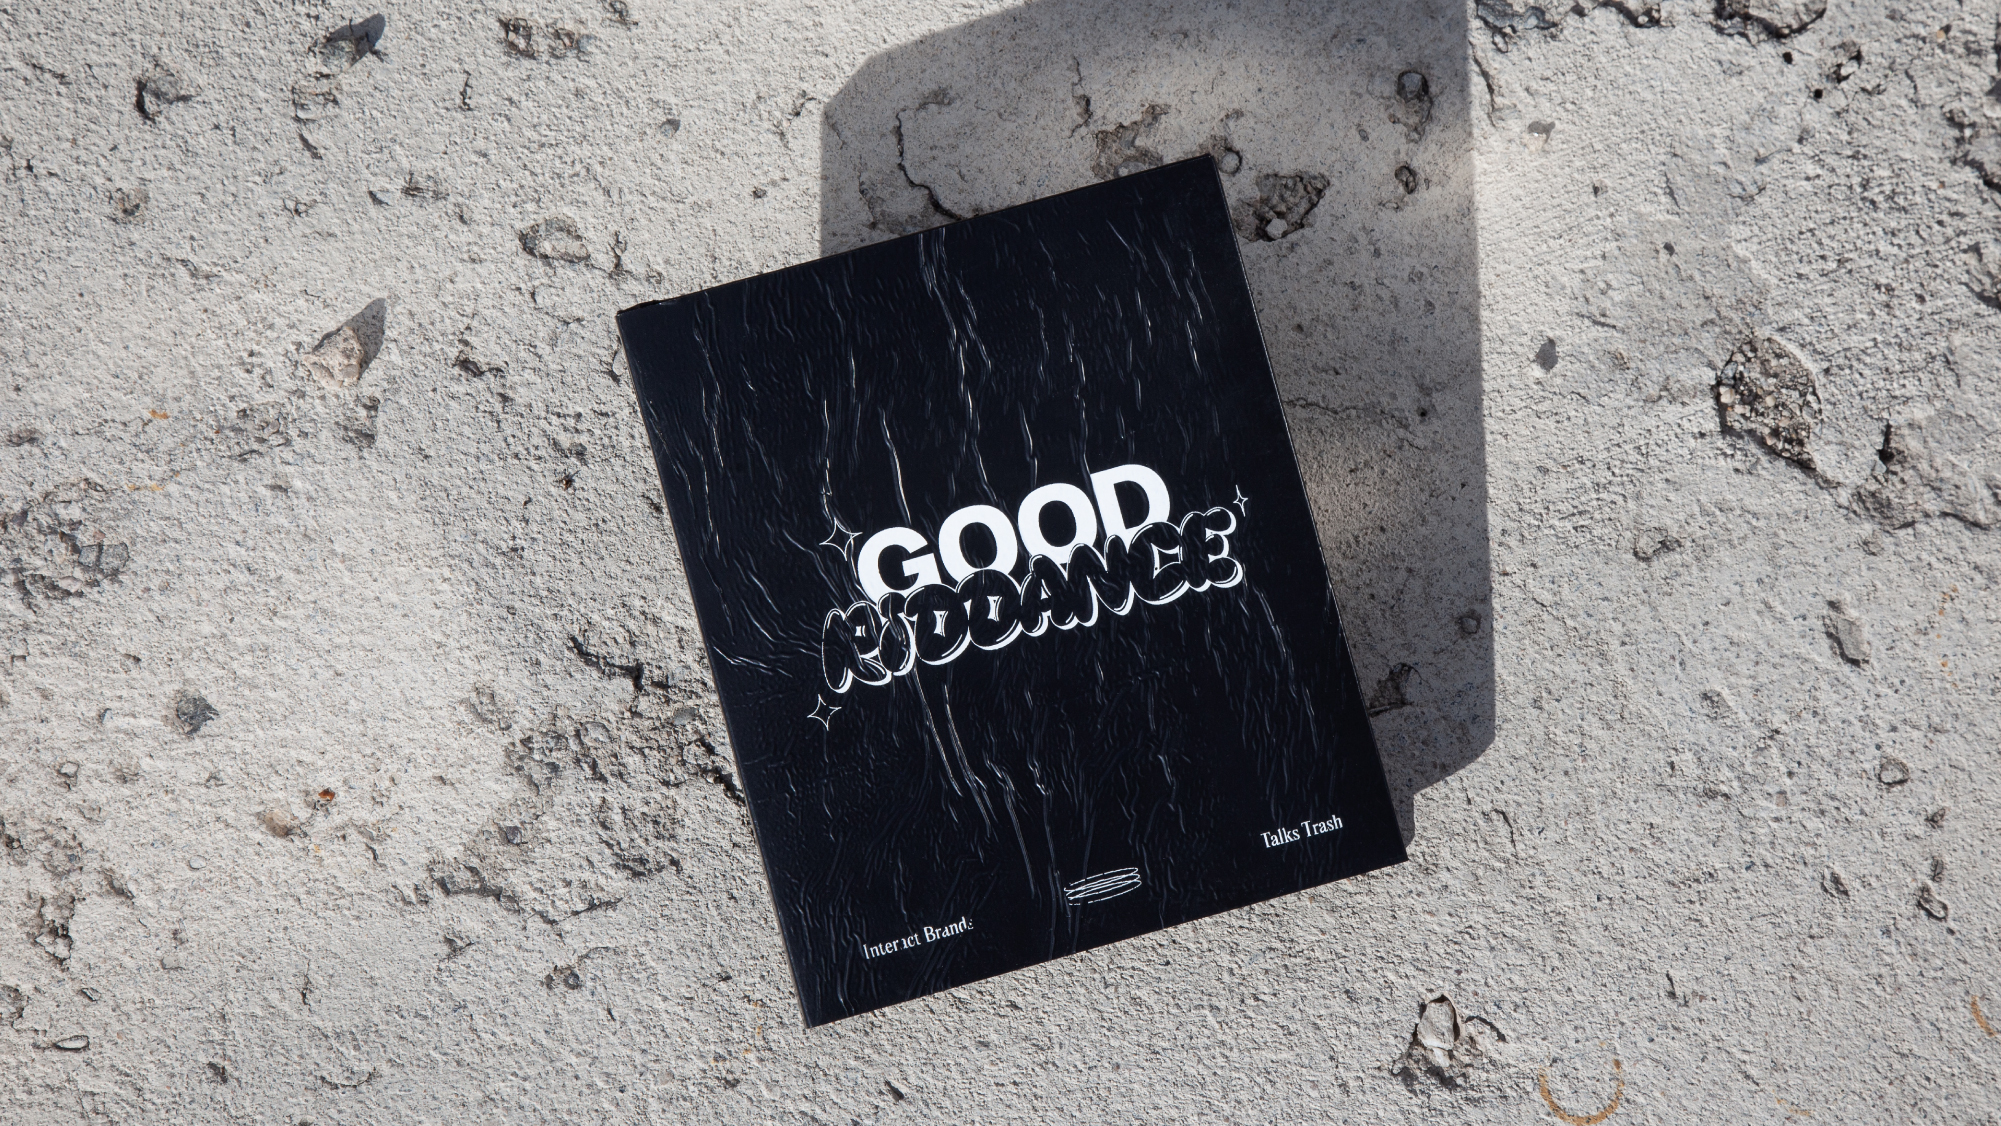 Interact Explores Sustainable Brand Design With Latest Book ‘Good Riddance’